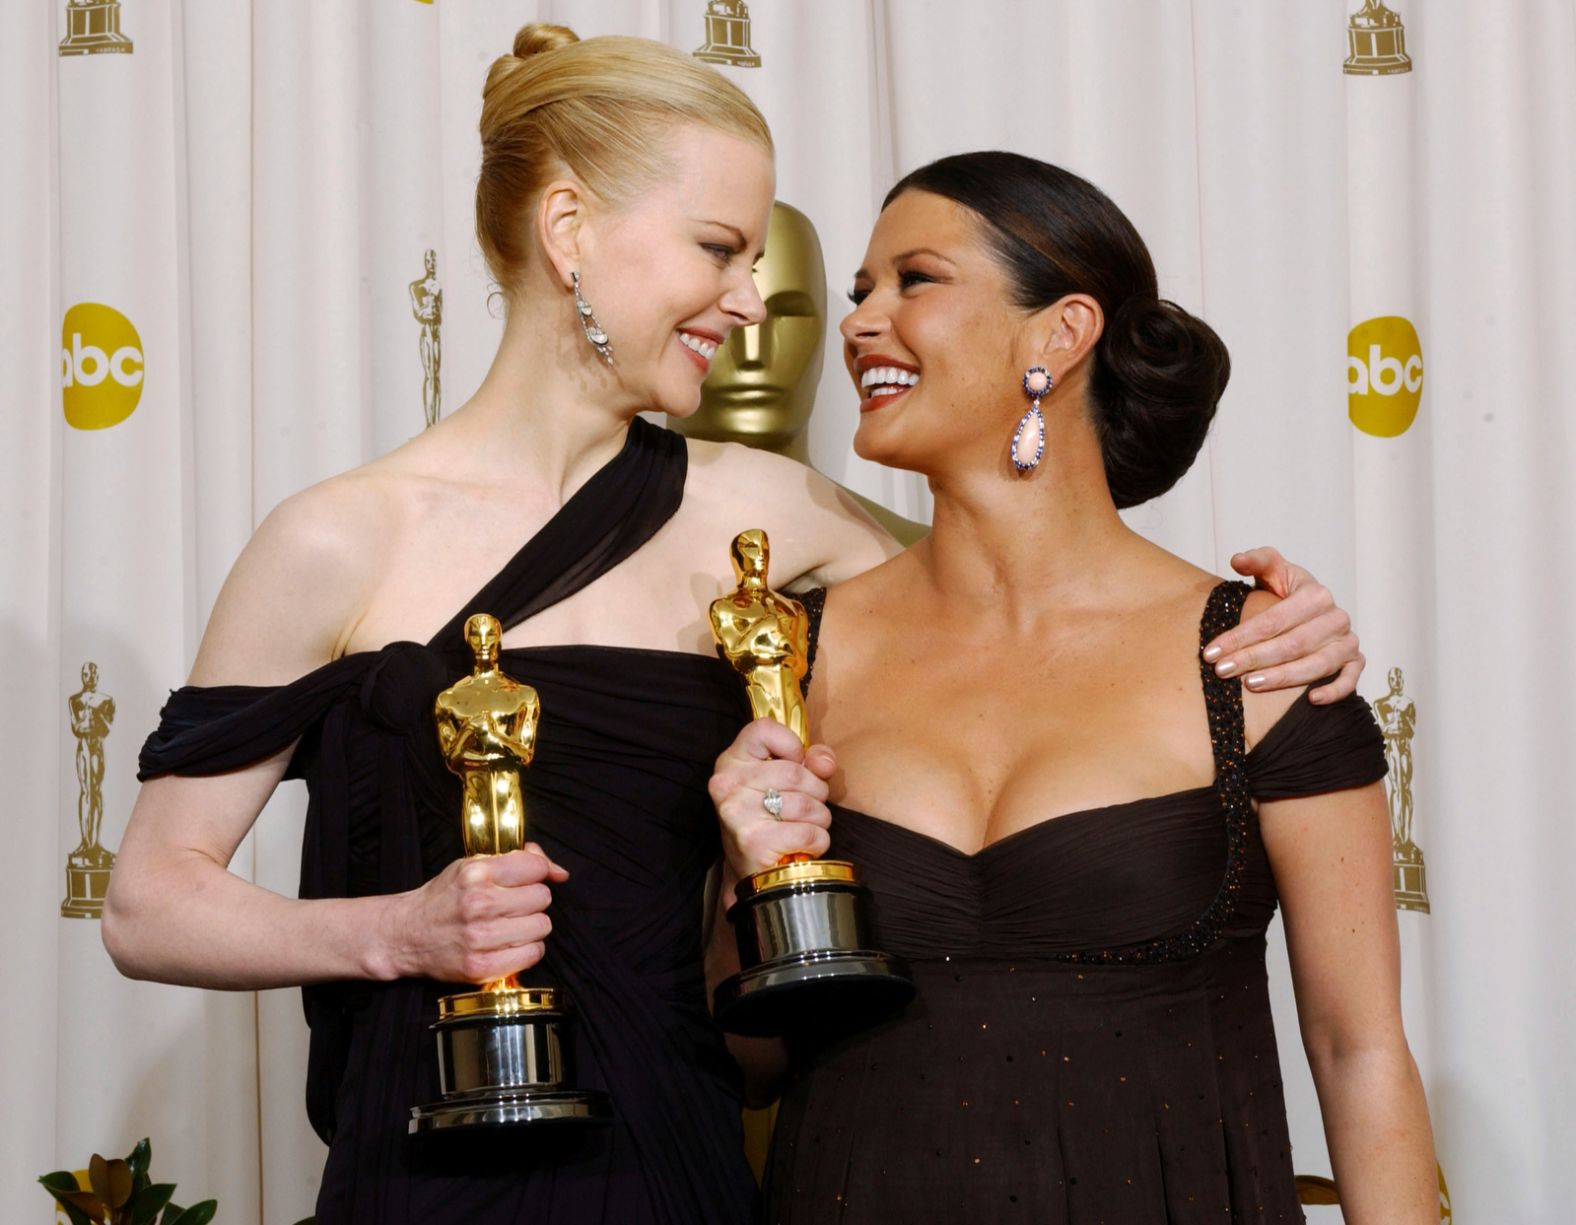 Kidman and Catherine Zeta-Jones pose with their Academy Awards in 2003. Kidman won for her role in "The Hours."